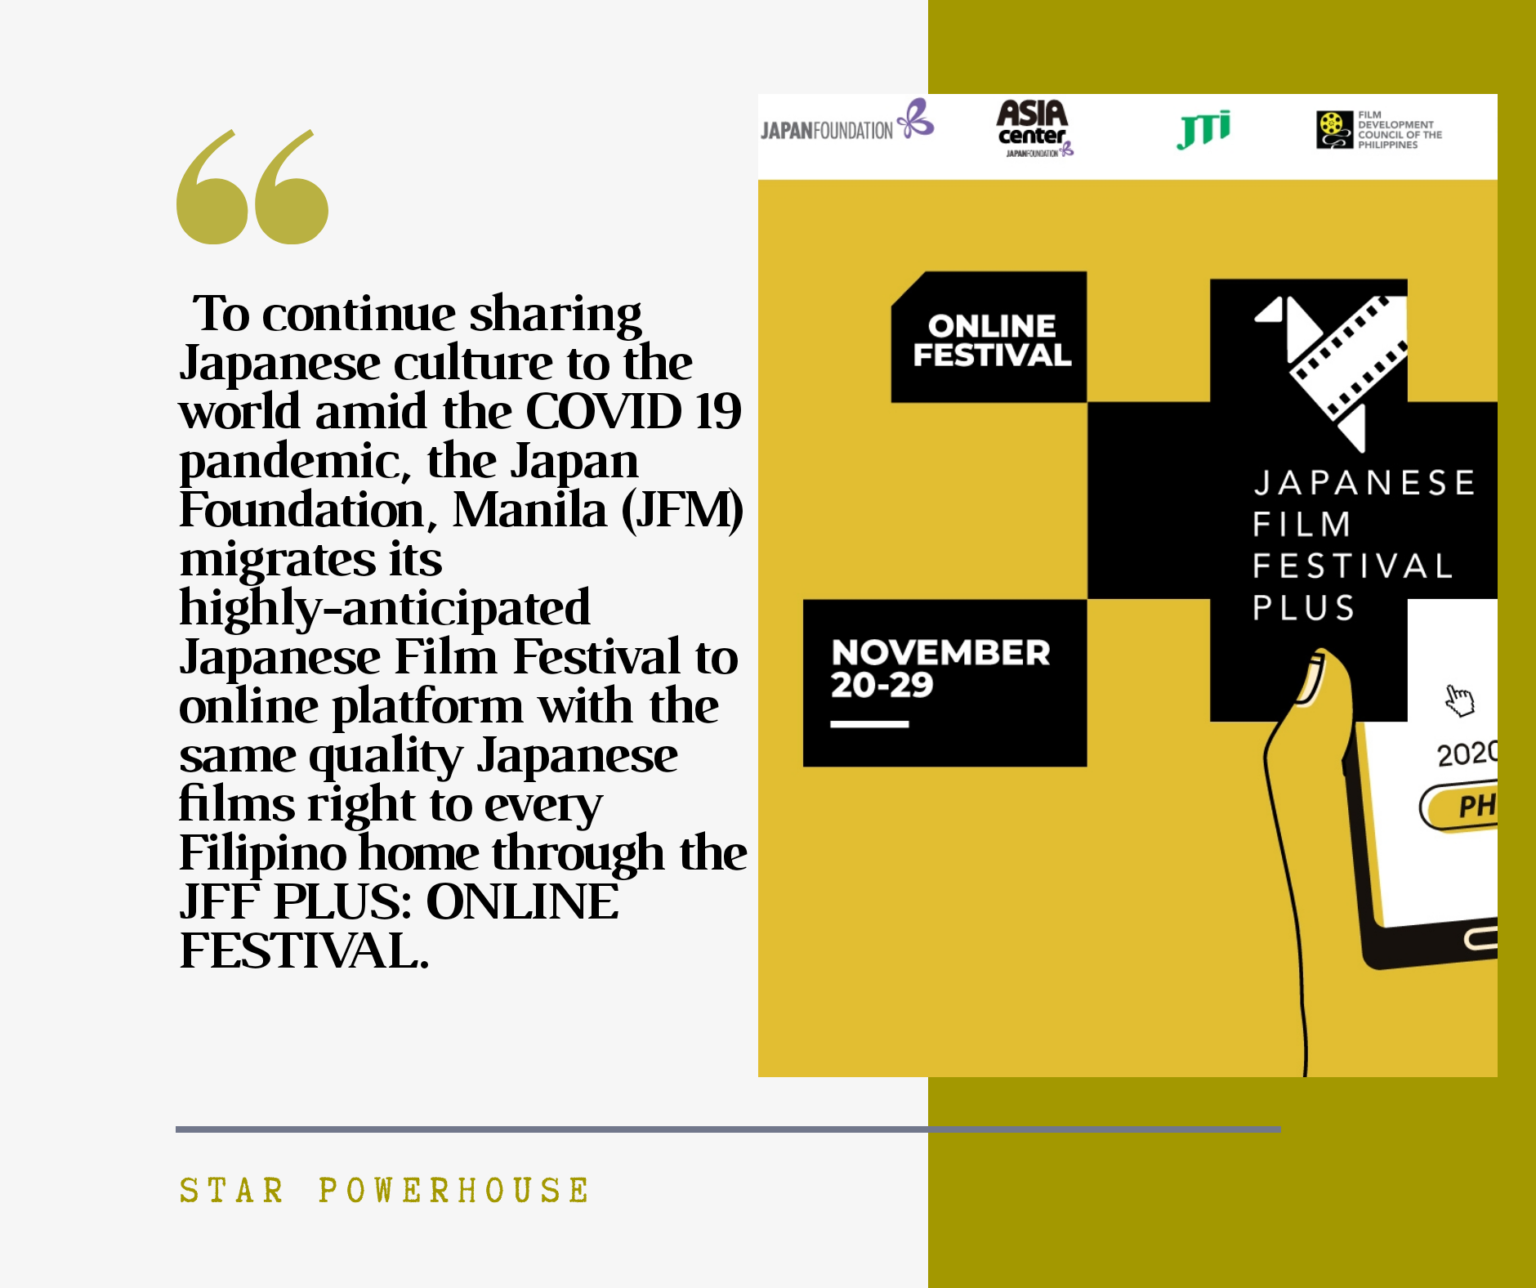 The Japan Foundation, Manila shifts its annual film festival from